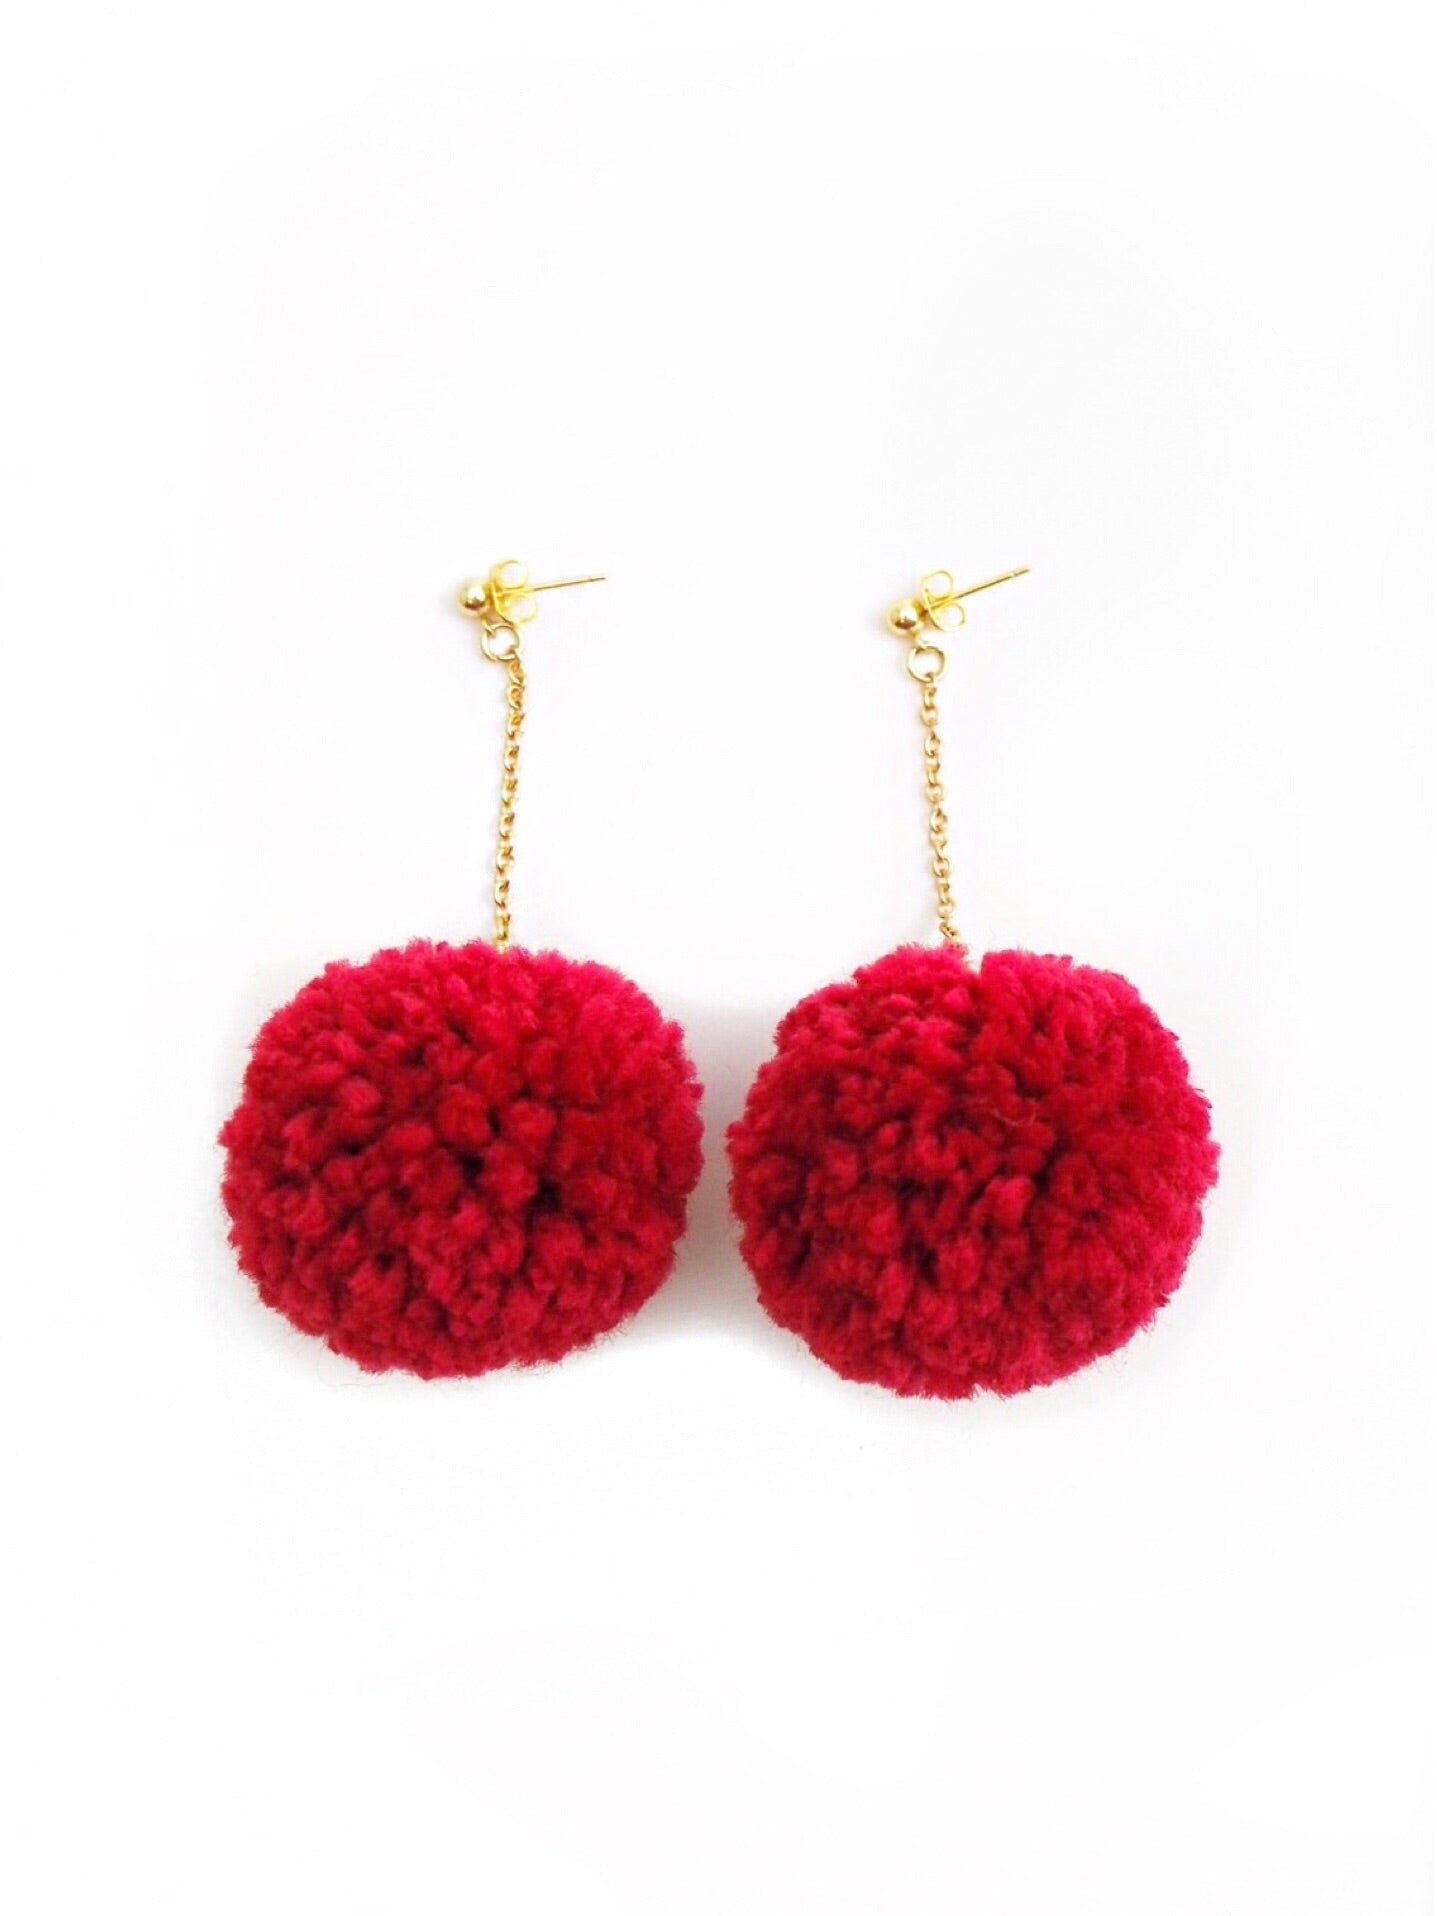 The Trend City combo of 2 Black Feather & Red Pom Pom Earrings